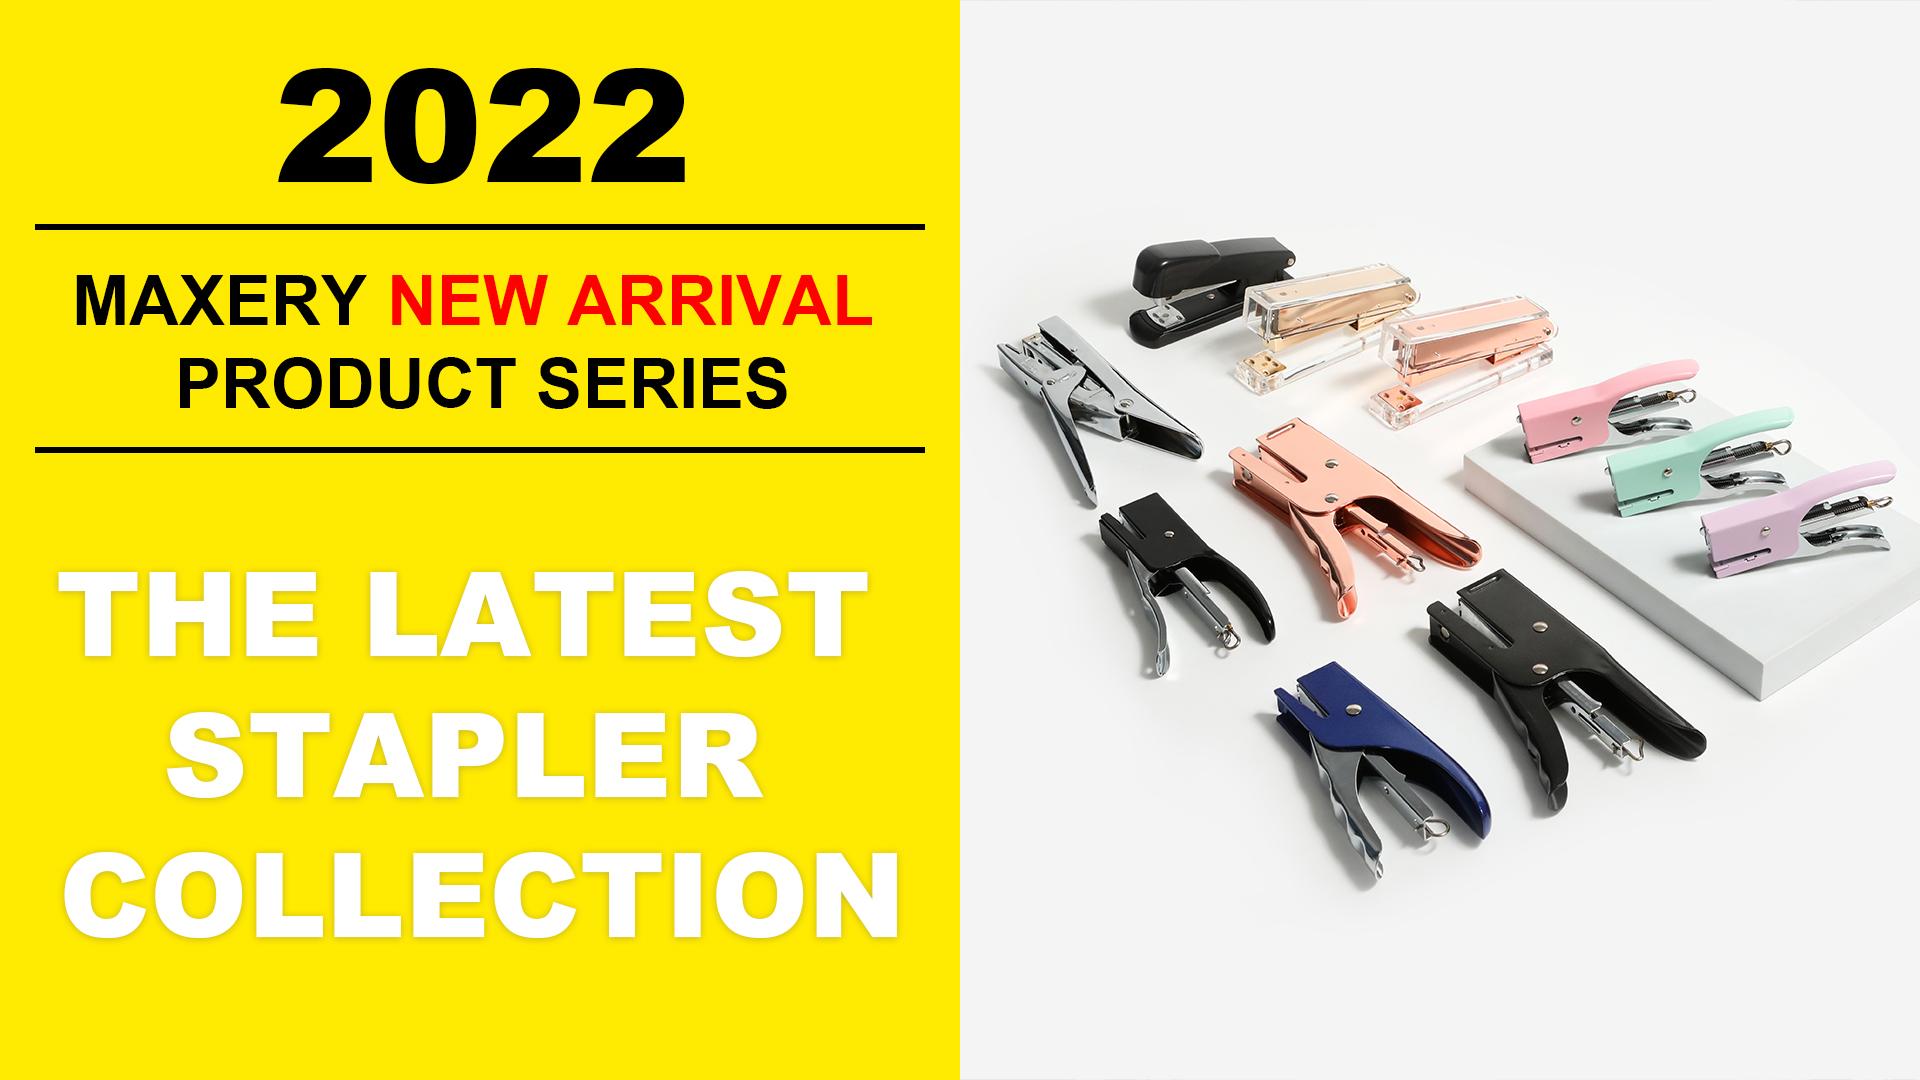 Maxery New Arrival Product Introduction--Lastest Stapler Collection